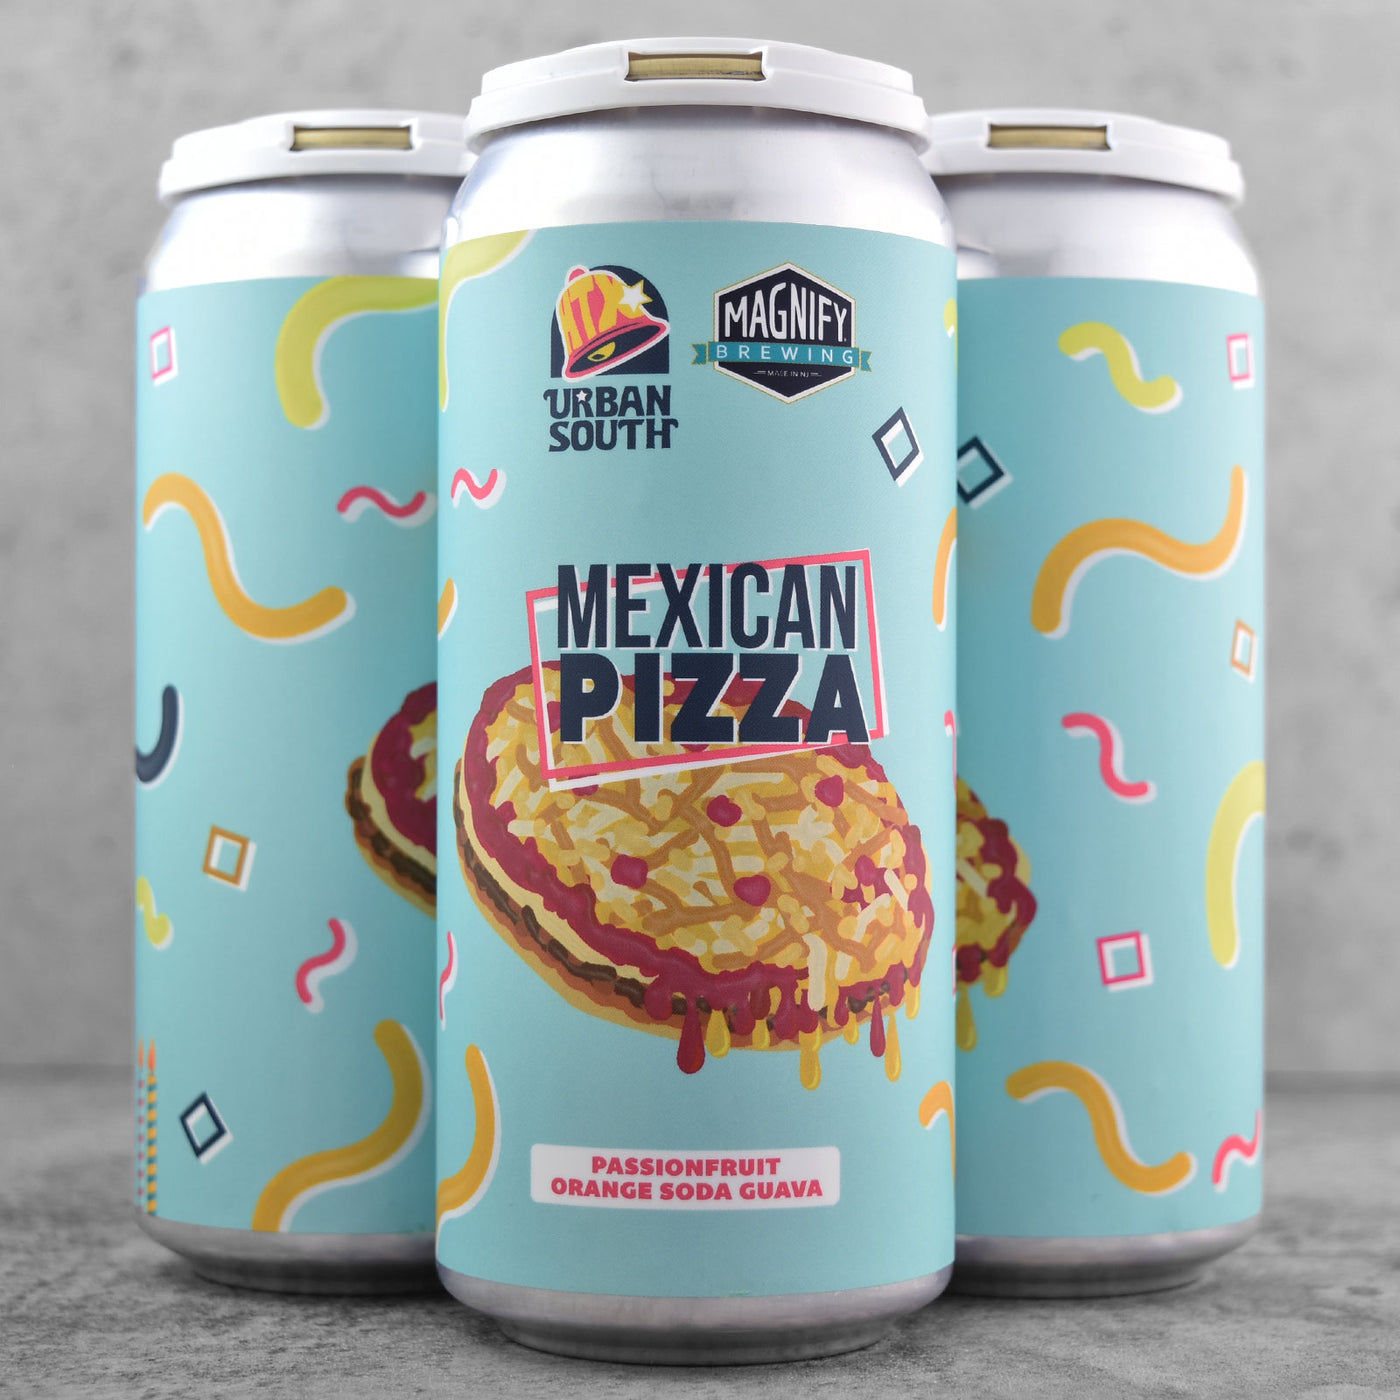 Urban South / Magnify - Mexican Pizza